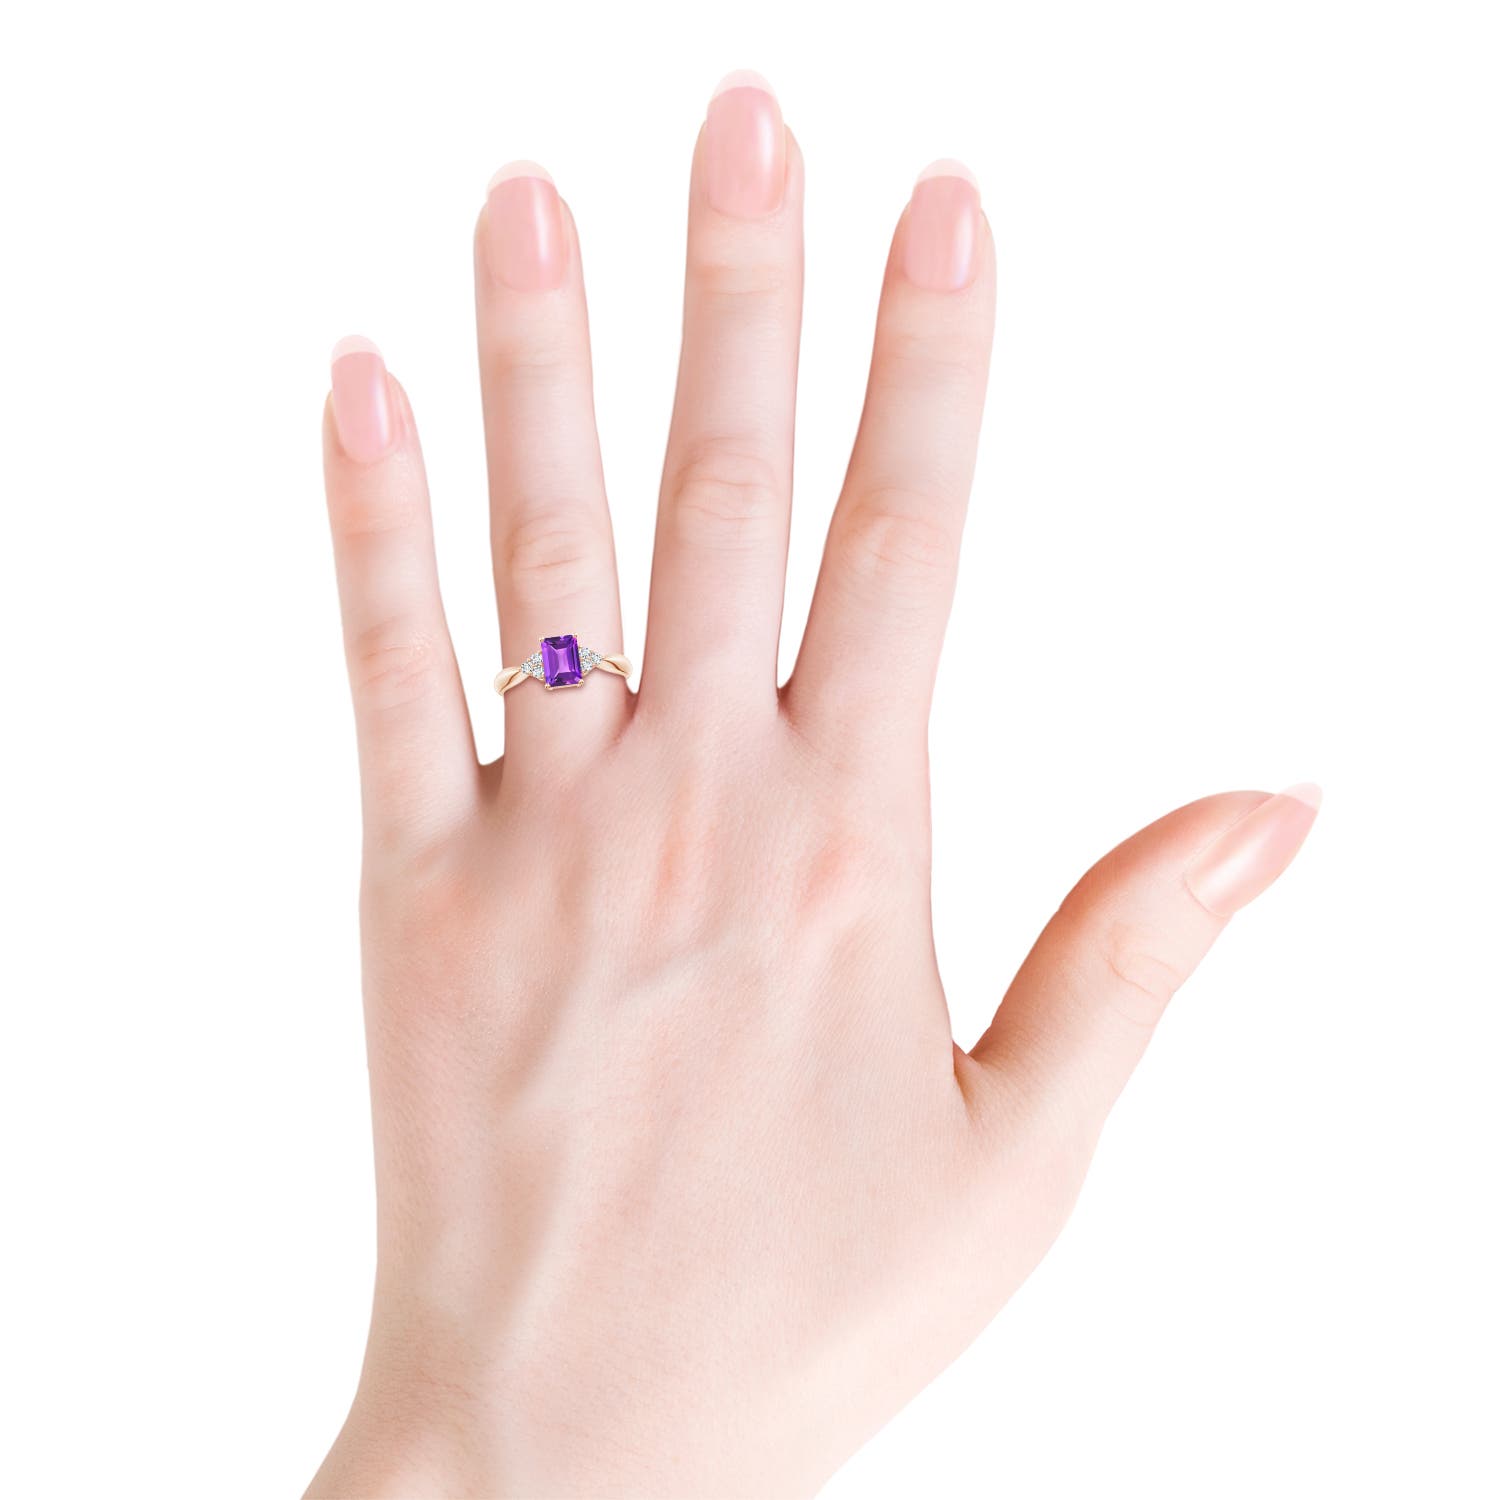 AAA - Amethyst / 1.07 CT / 14 KT Rose Gold